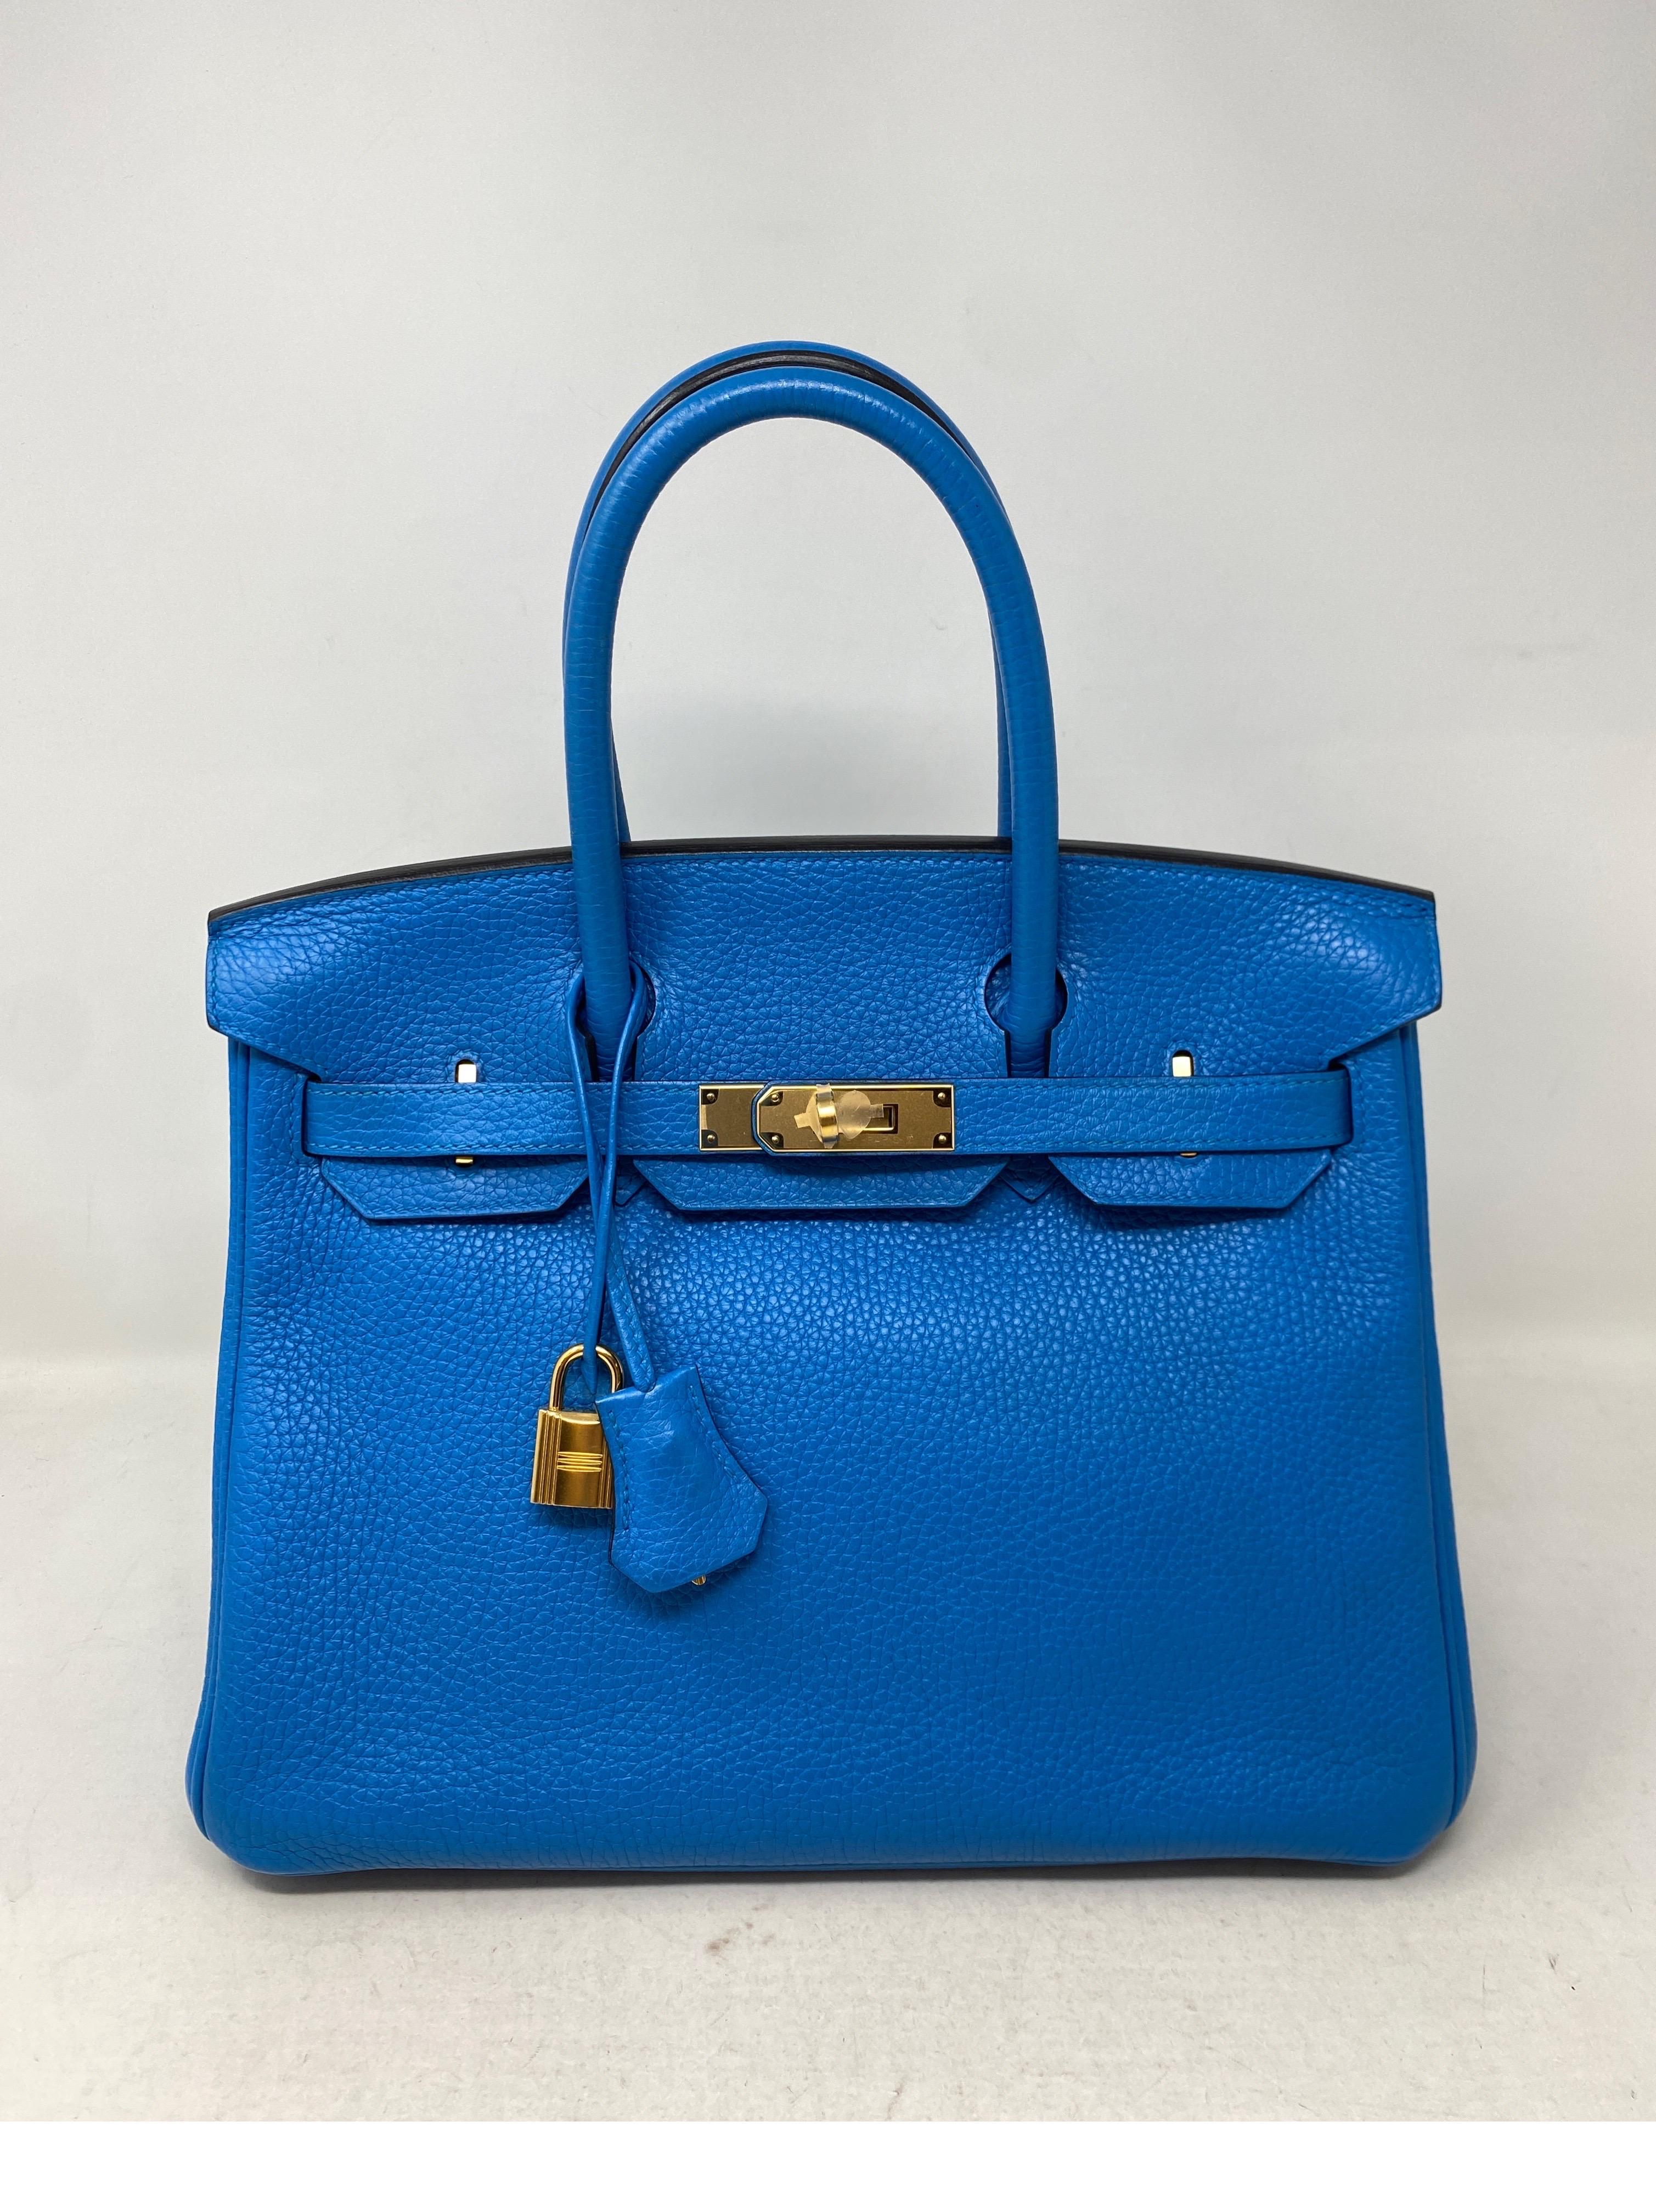 Hermes Blue Zanzibar Birkin 30 Bag. Excellent like new condition. New bag. Rare bright blue color with gold hardware. Clemence leather. Includes clochette, lock ,keys, and dust bag. Guaranteed authentic. Don't miss out on a unique color and size. 